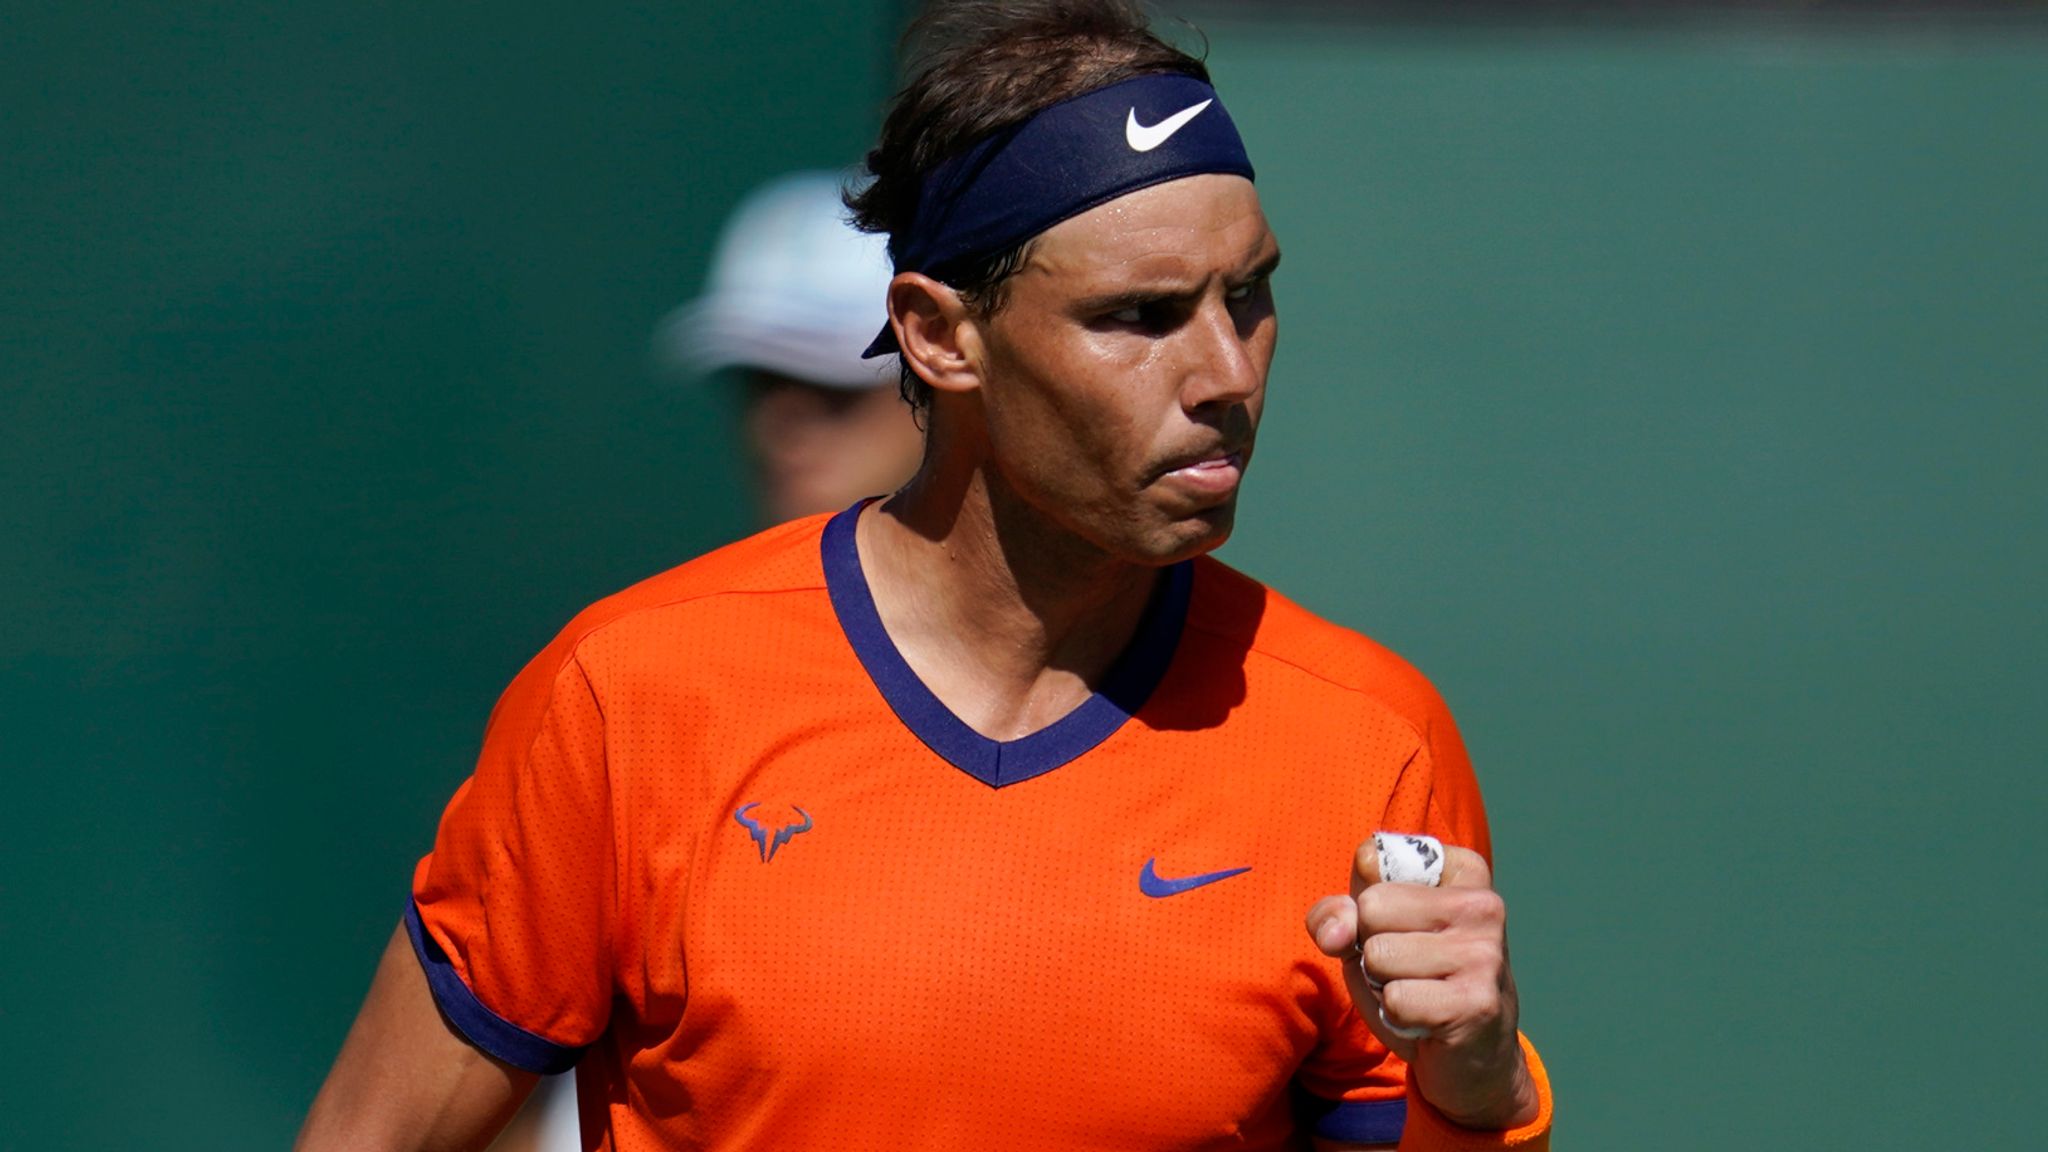 Rafael Nadal Spaniard improves to 18-0 for 2022 to reach quarter-finals at Indian Wells Tennis News Sky Sports